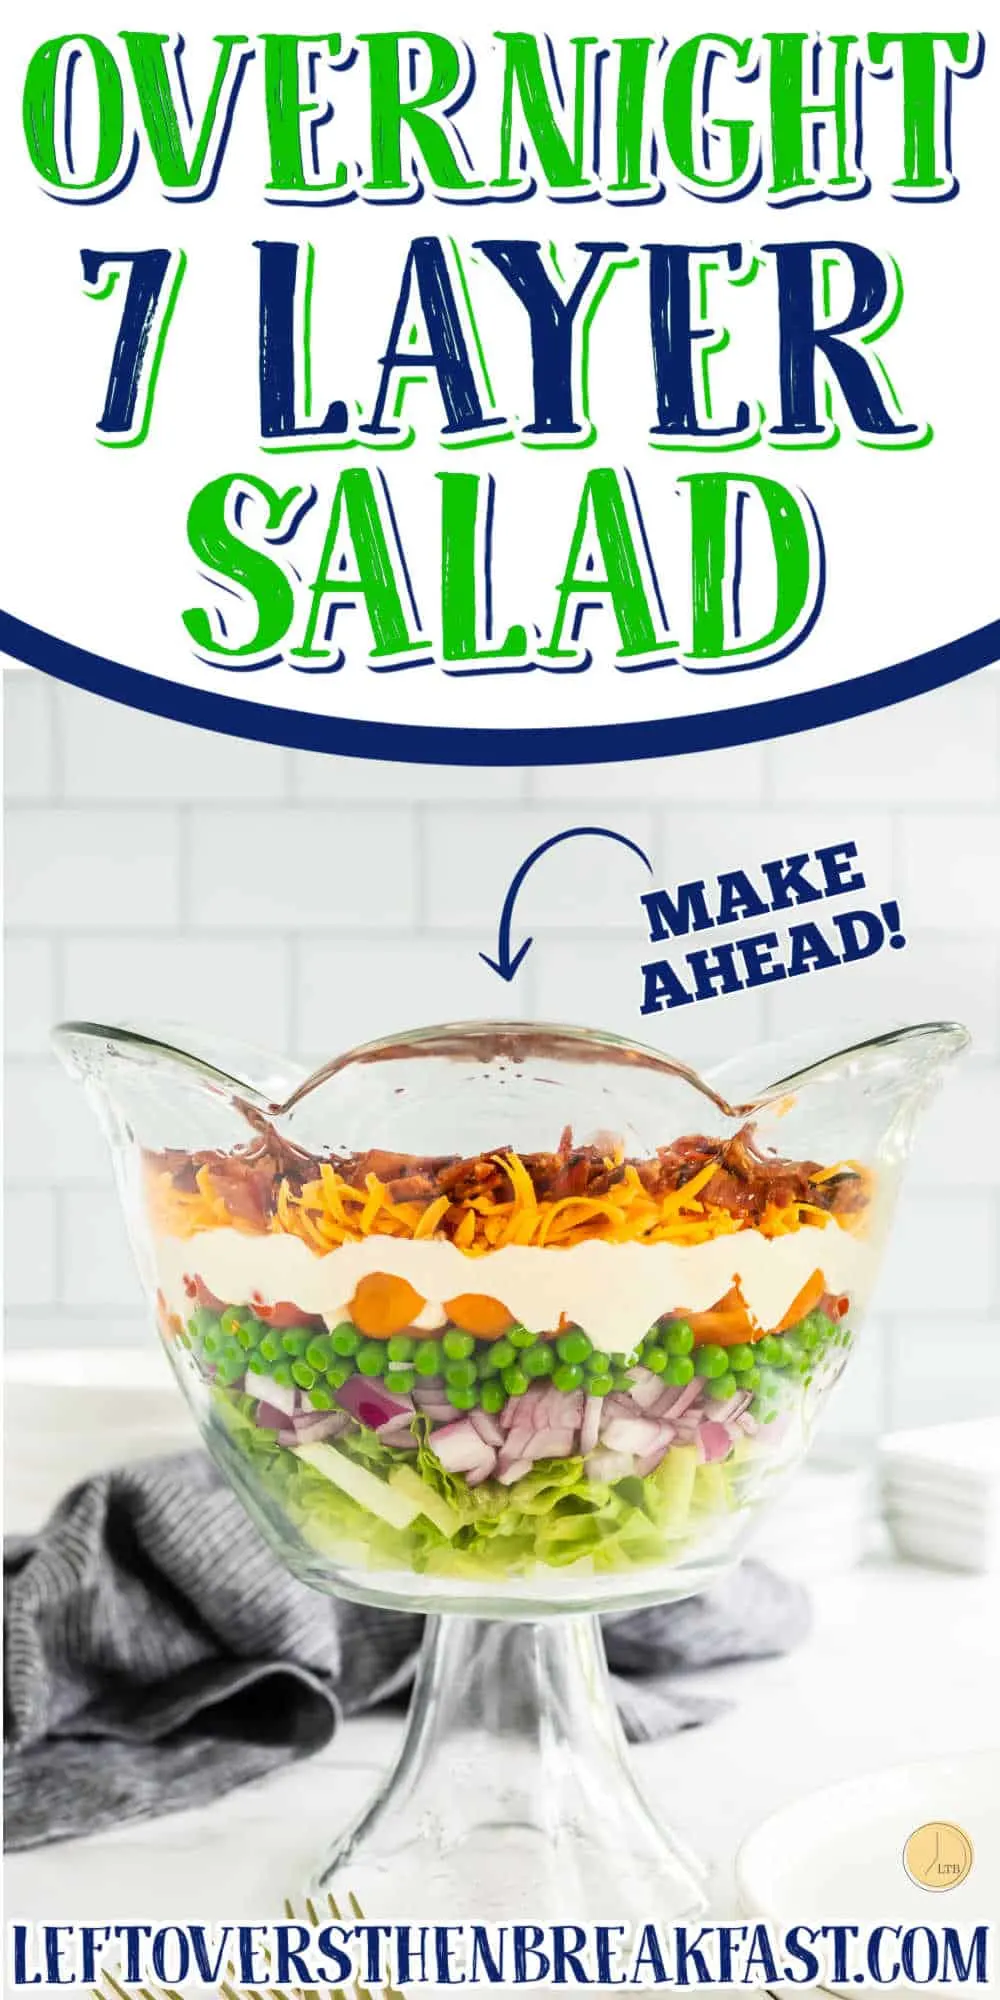 trifle bowl with text "overnight 7 layer salad"